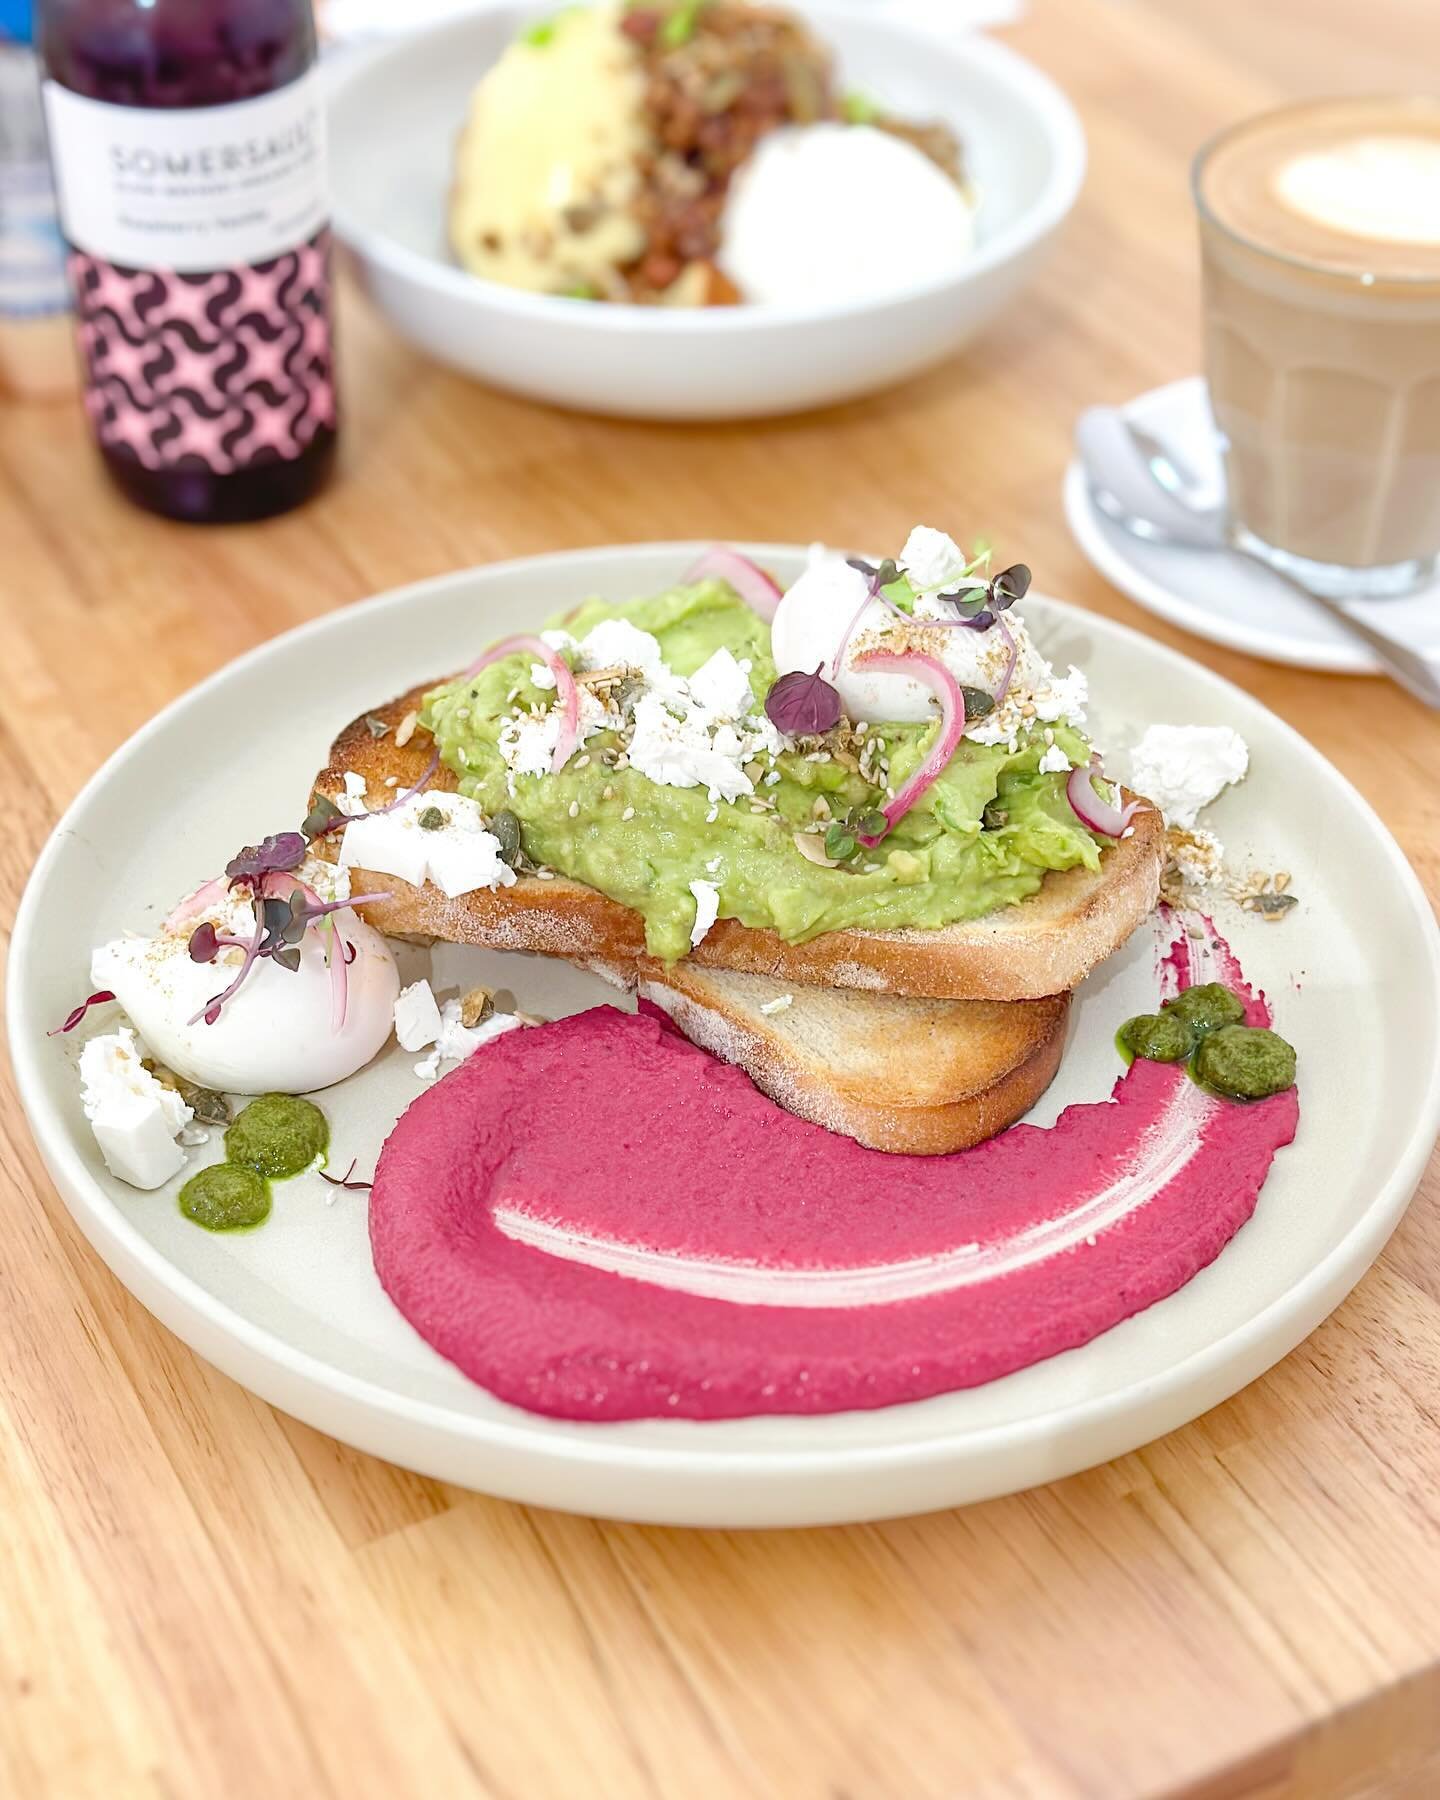 There&rsquo;s smashed avo&hellip;&hellip;and then there&rsquo;s smashed avo! 🥑🥰 

Served on sourdough with poached eggs, beetroot hummus, feta and basil pesto 🤤